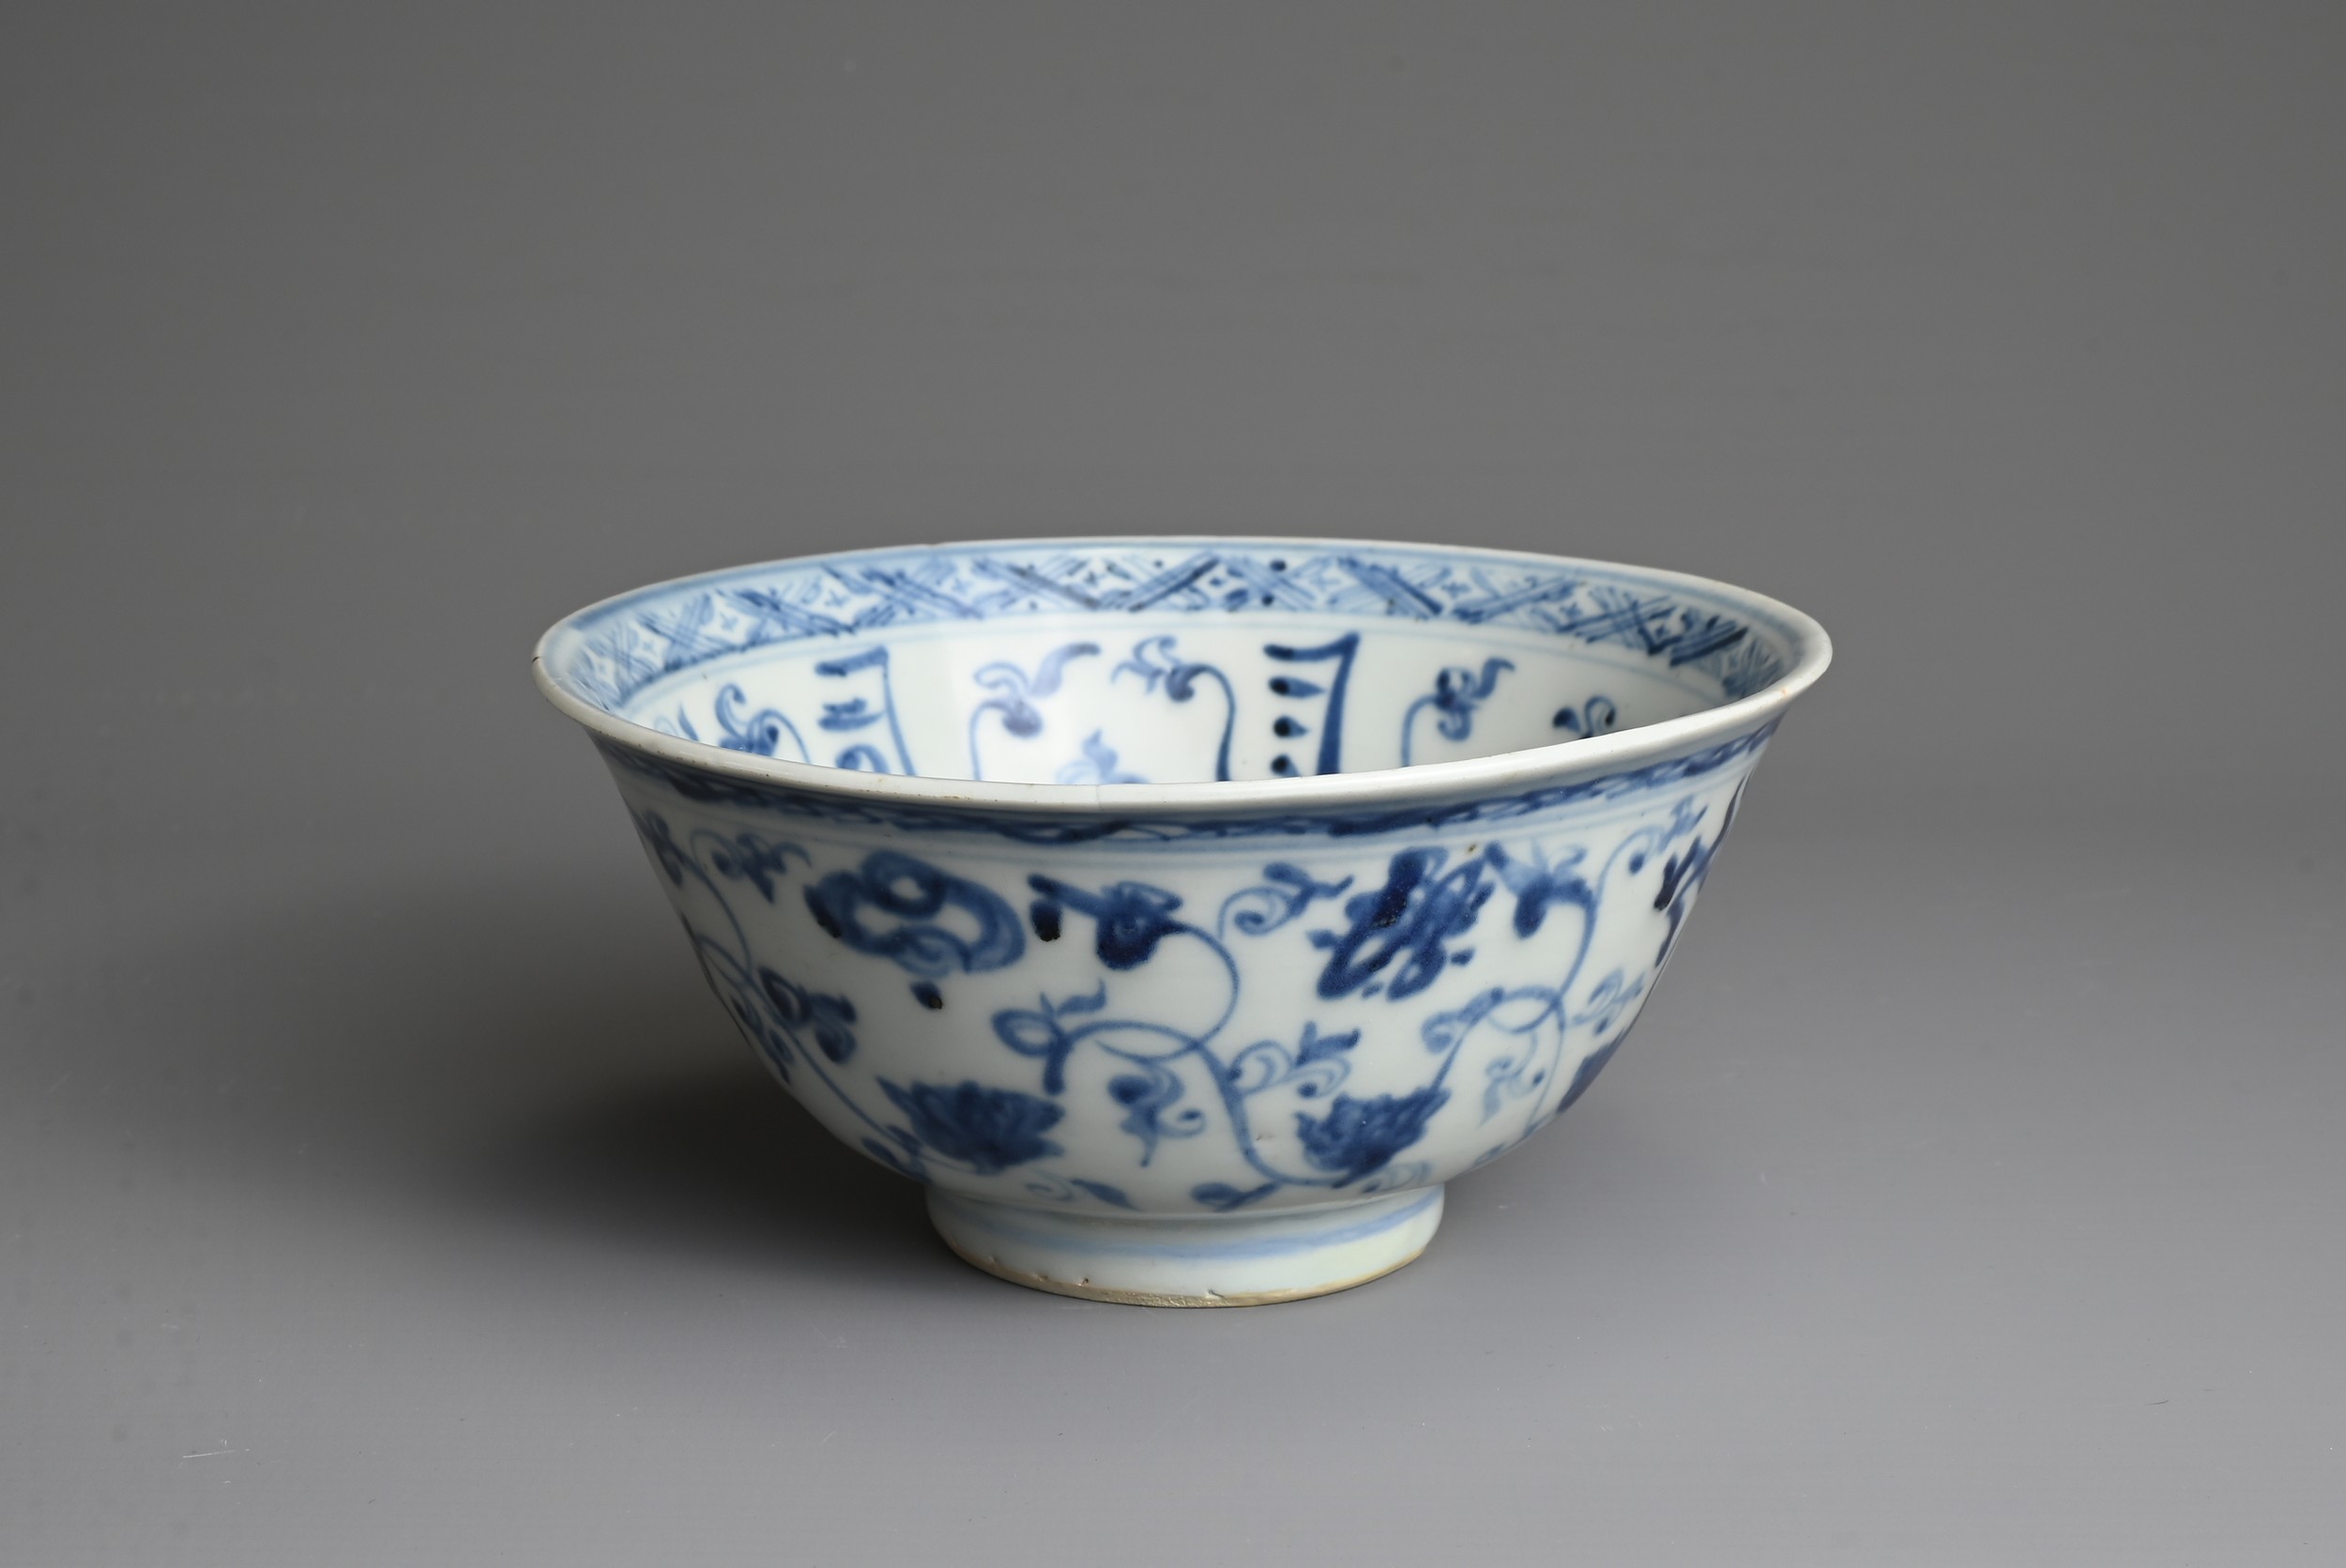 A CHINESE BLUE AND WHITE PORCELAIN BOWL, MING DYNASTY. Decorated with lotus scrolls and Buddhist - Image 3 of 7